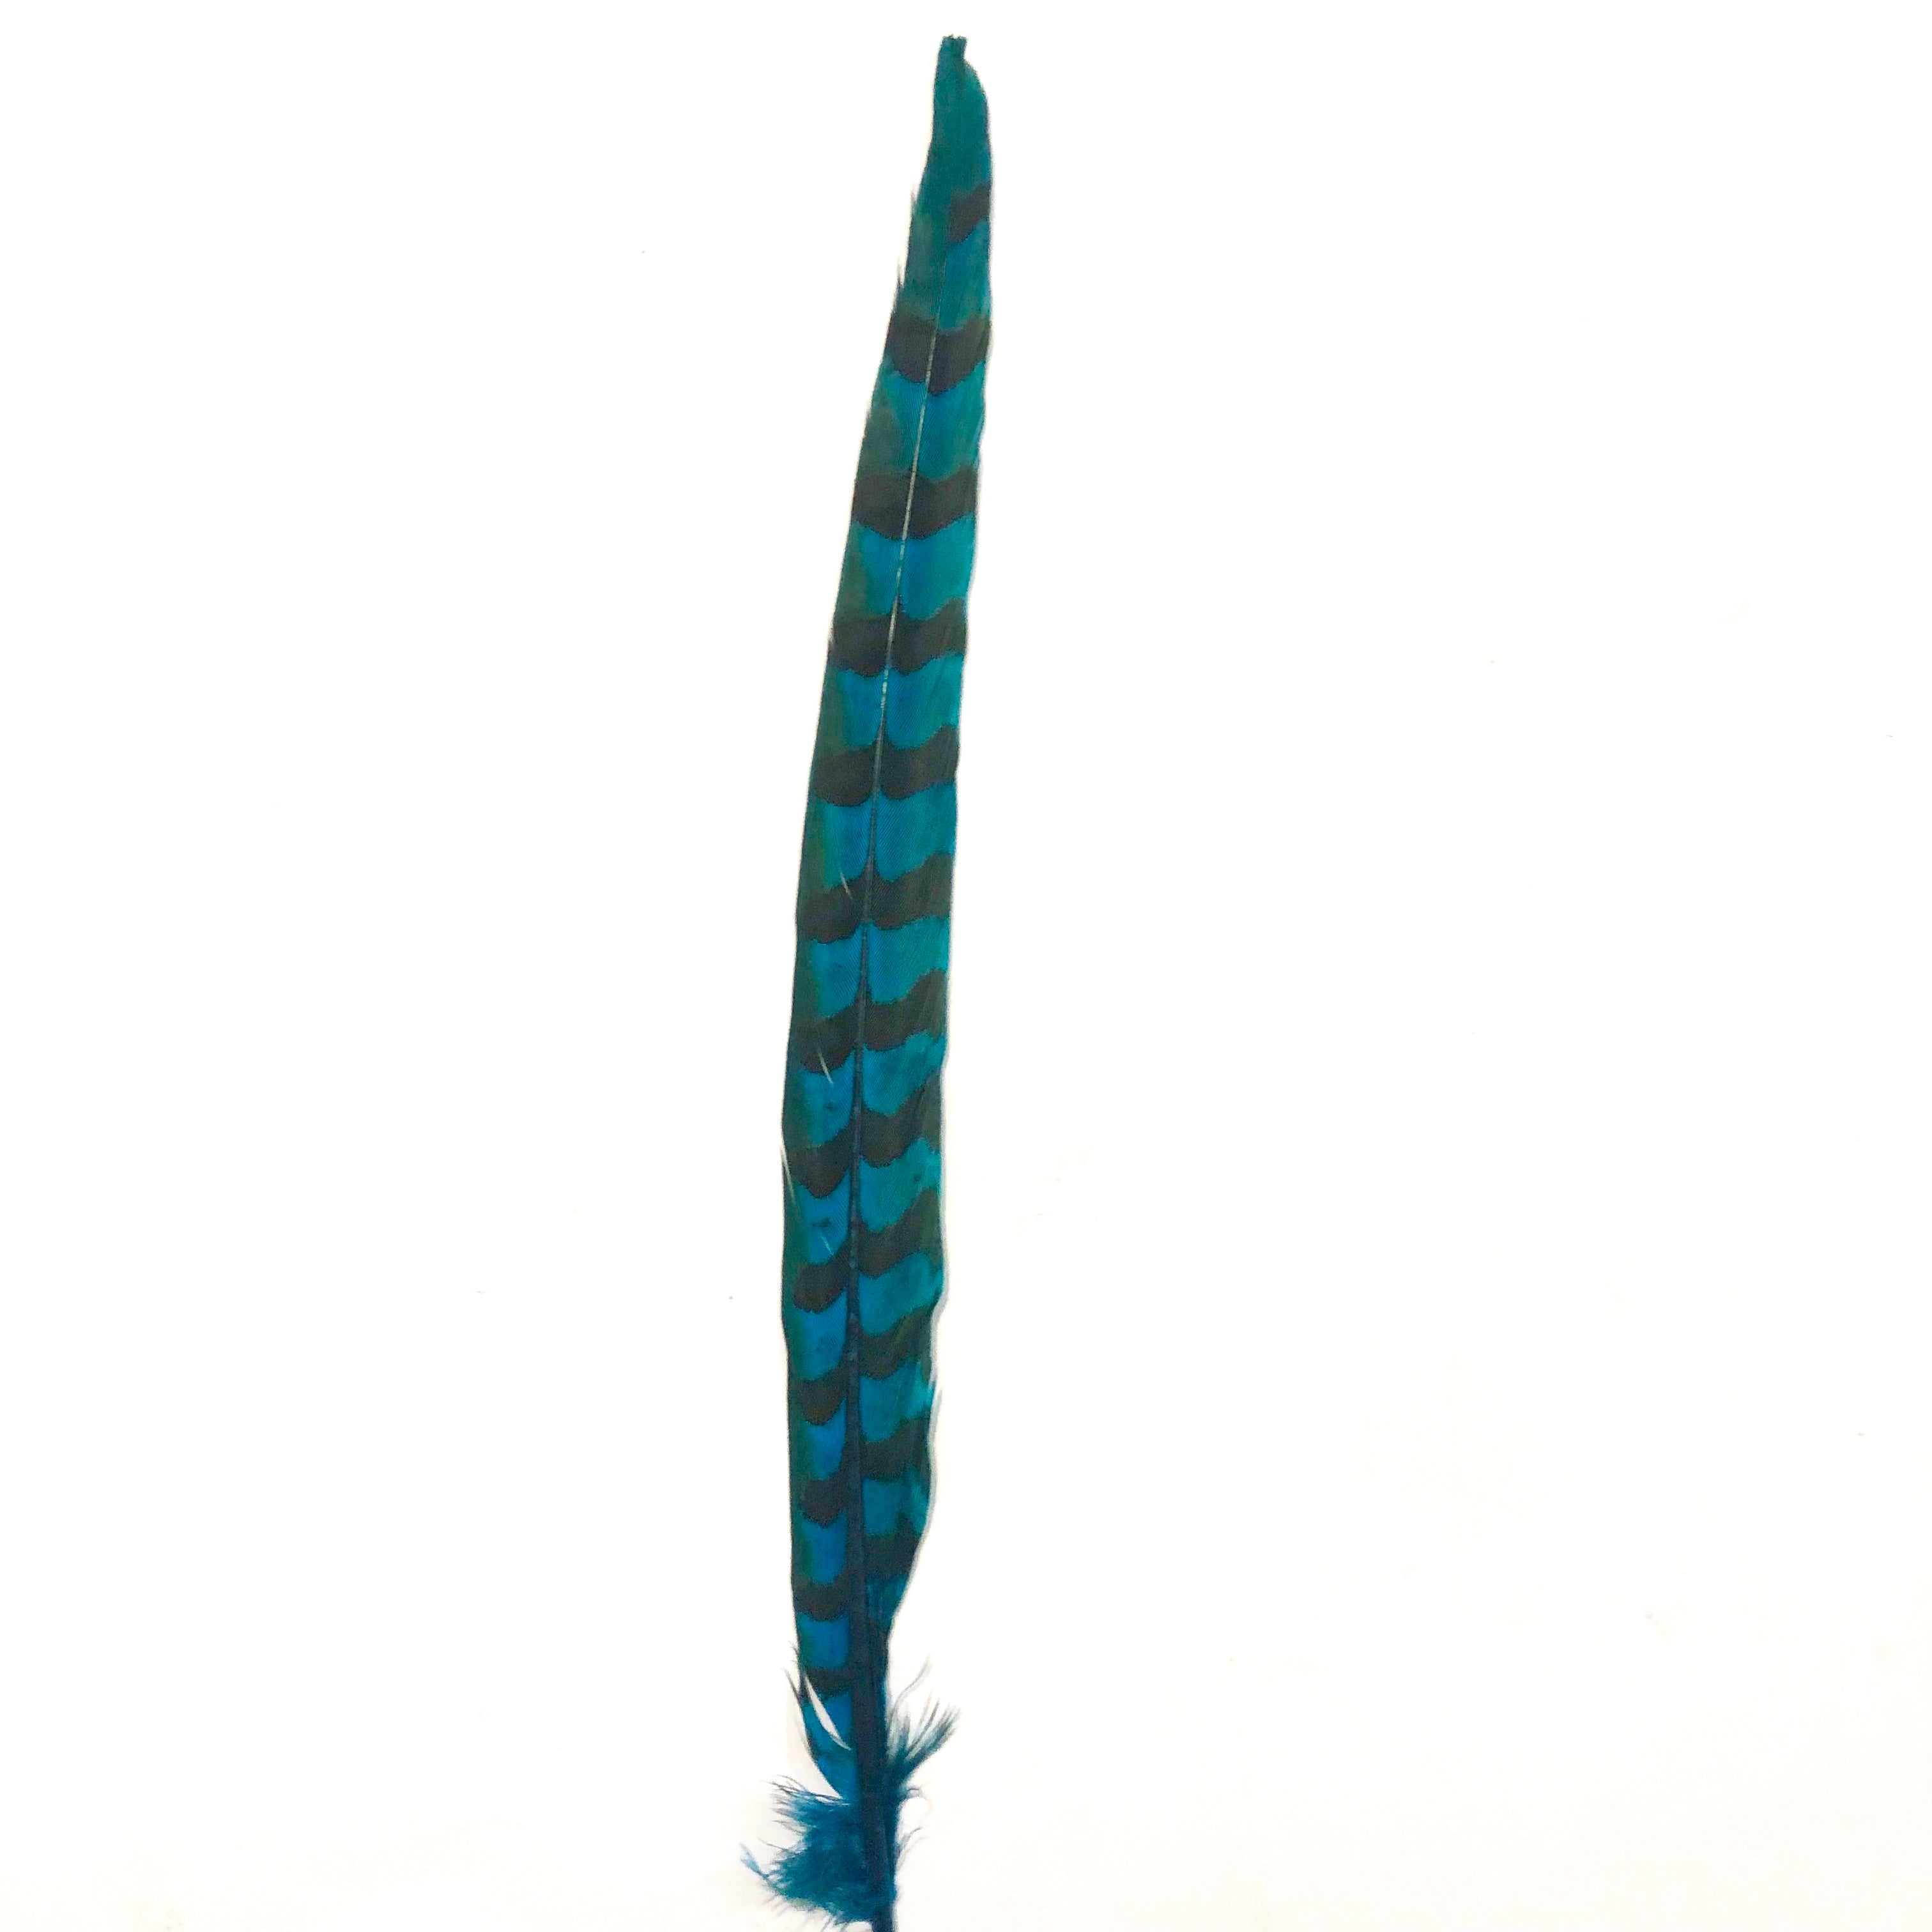 8" to 10" Reeves Pheasant Tail Feather - Turquoise